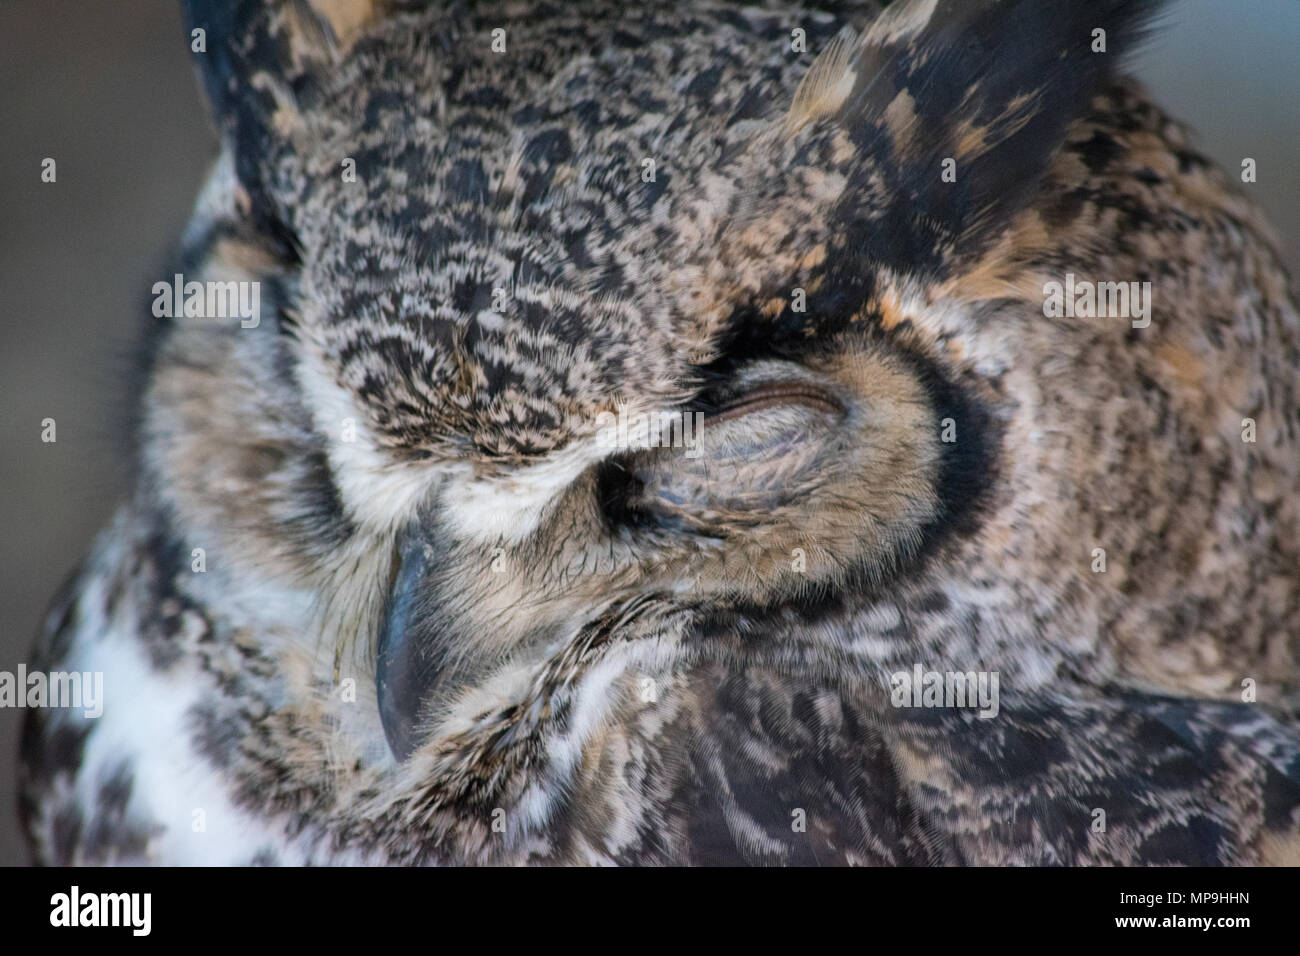 Sleeping Great Horned Owl (Bubo virginianus), also known as the tiger owl is a large owl native to the Americas. Stock Photo